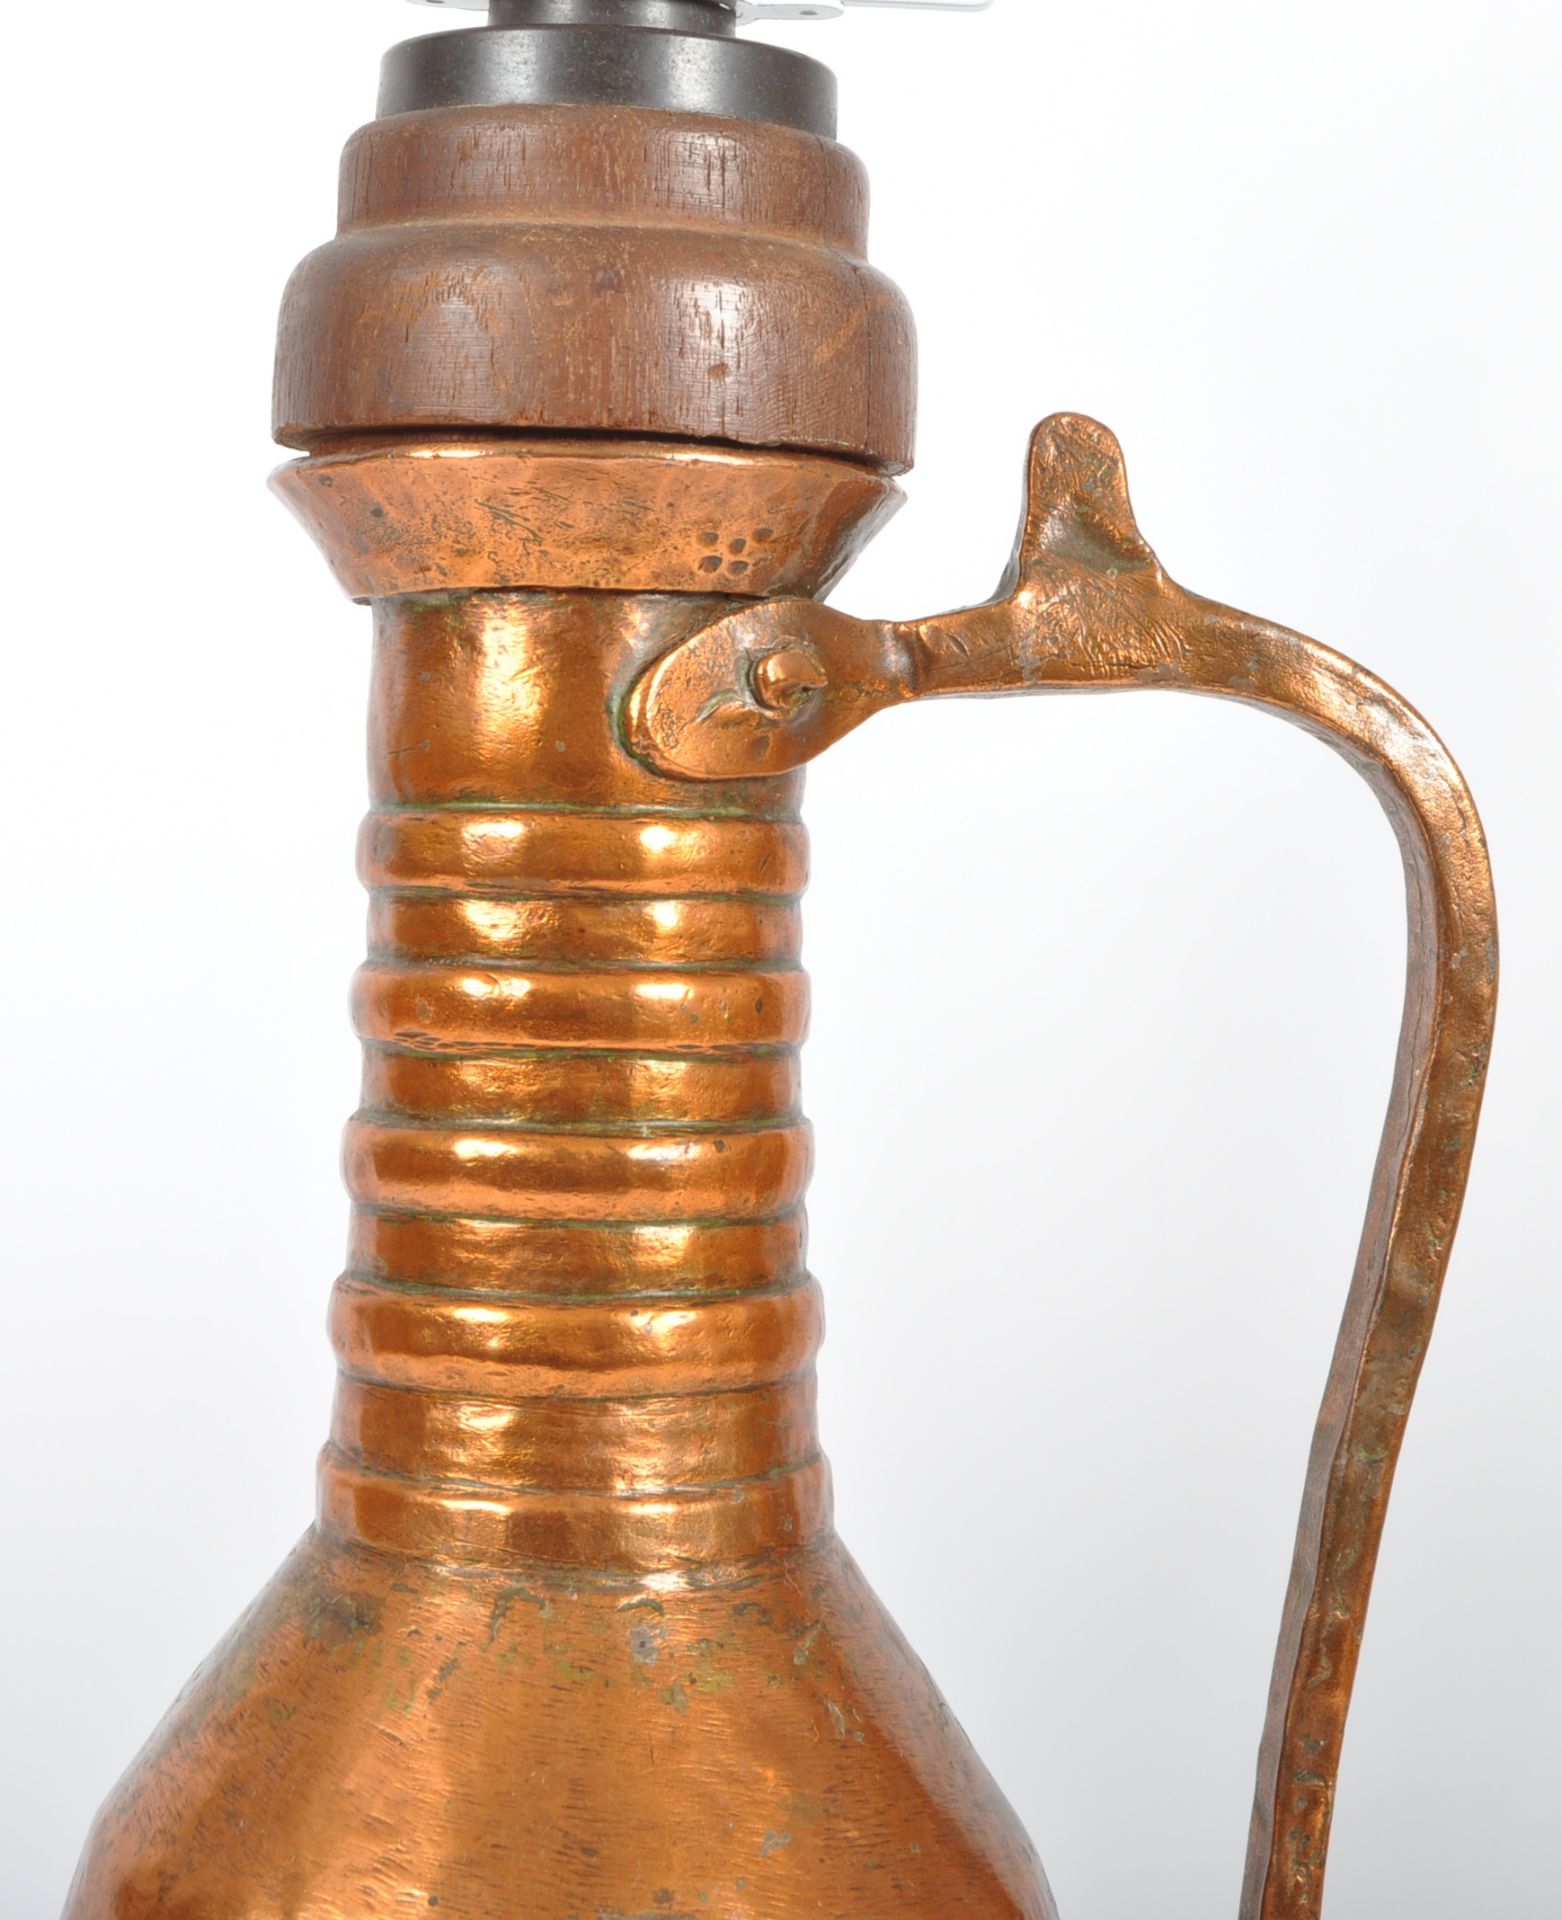 LATE 18TH CENTURY UPCYCLED COPPER EWER JUG LAMP - Image 3 of 8